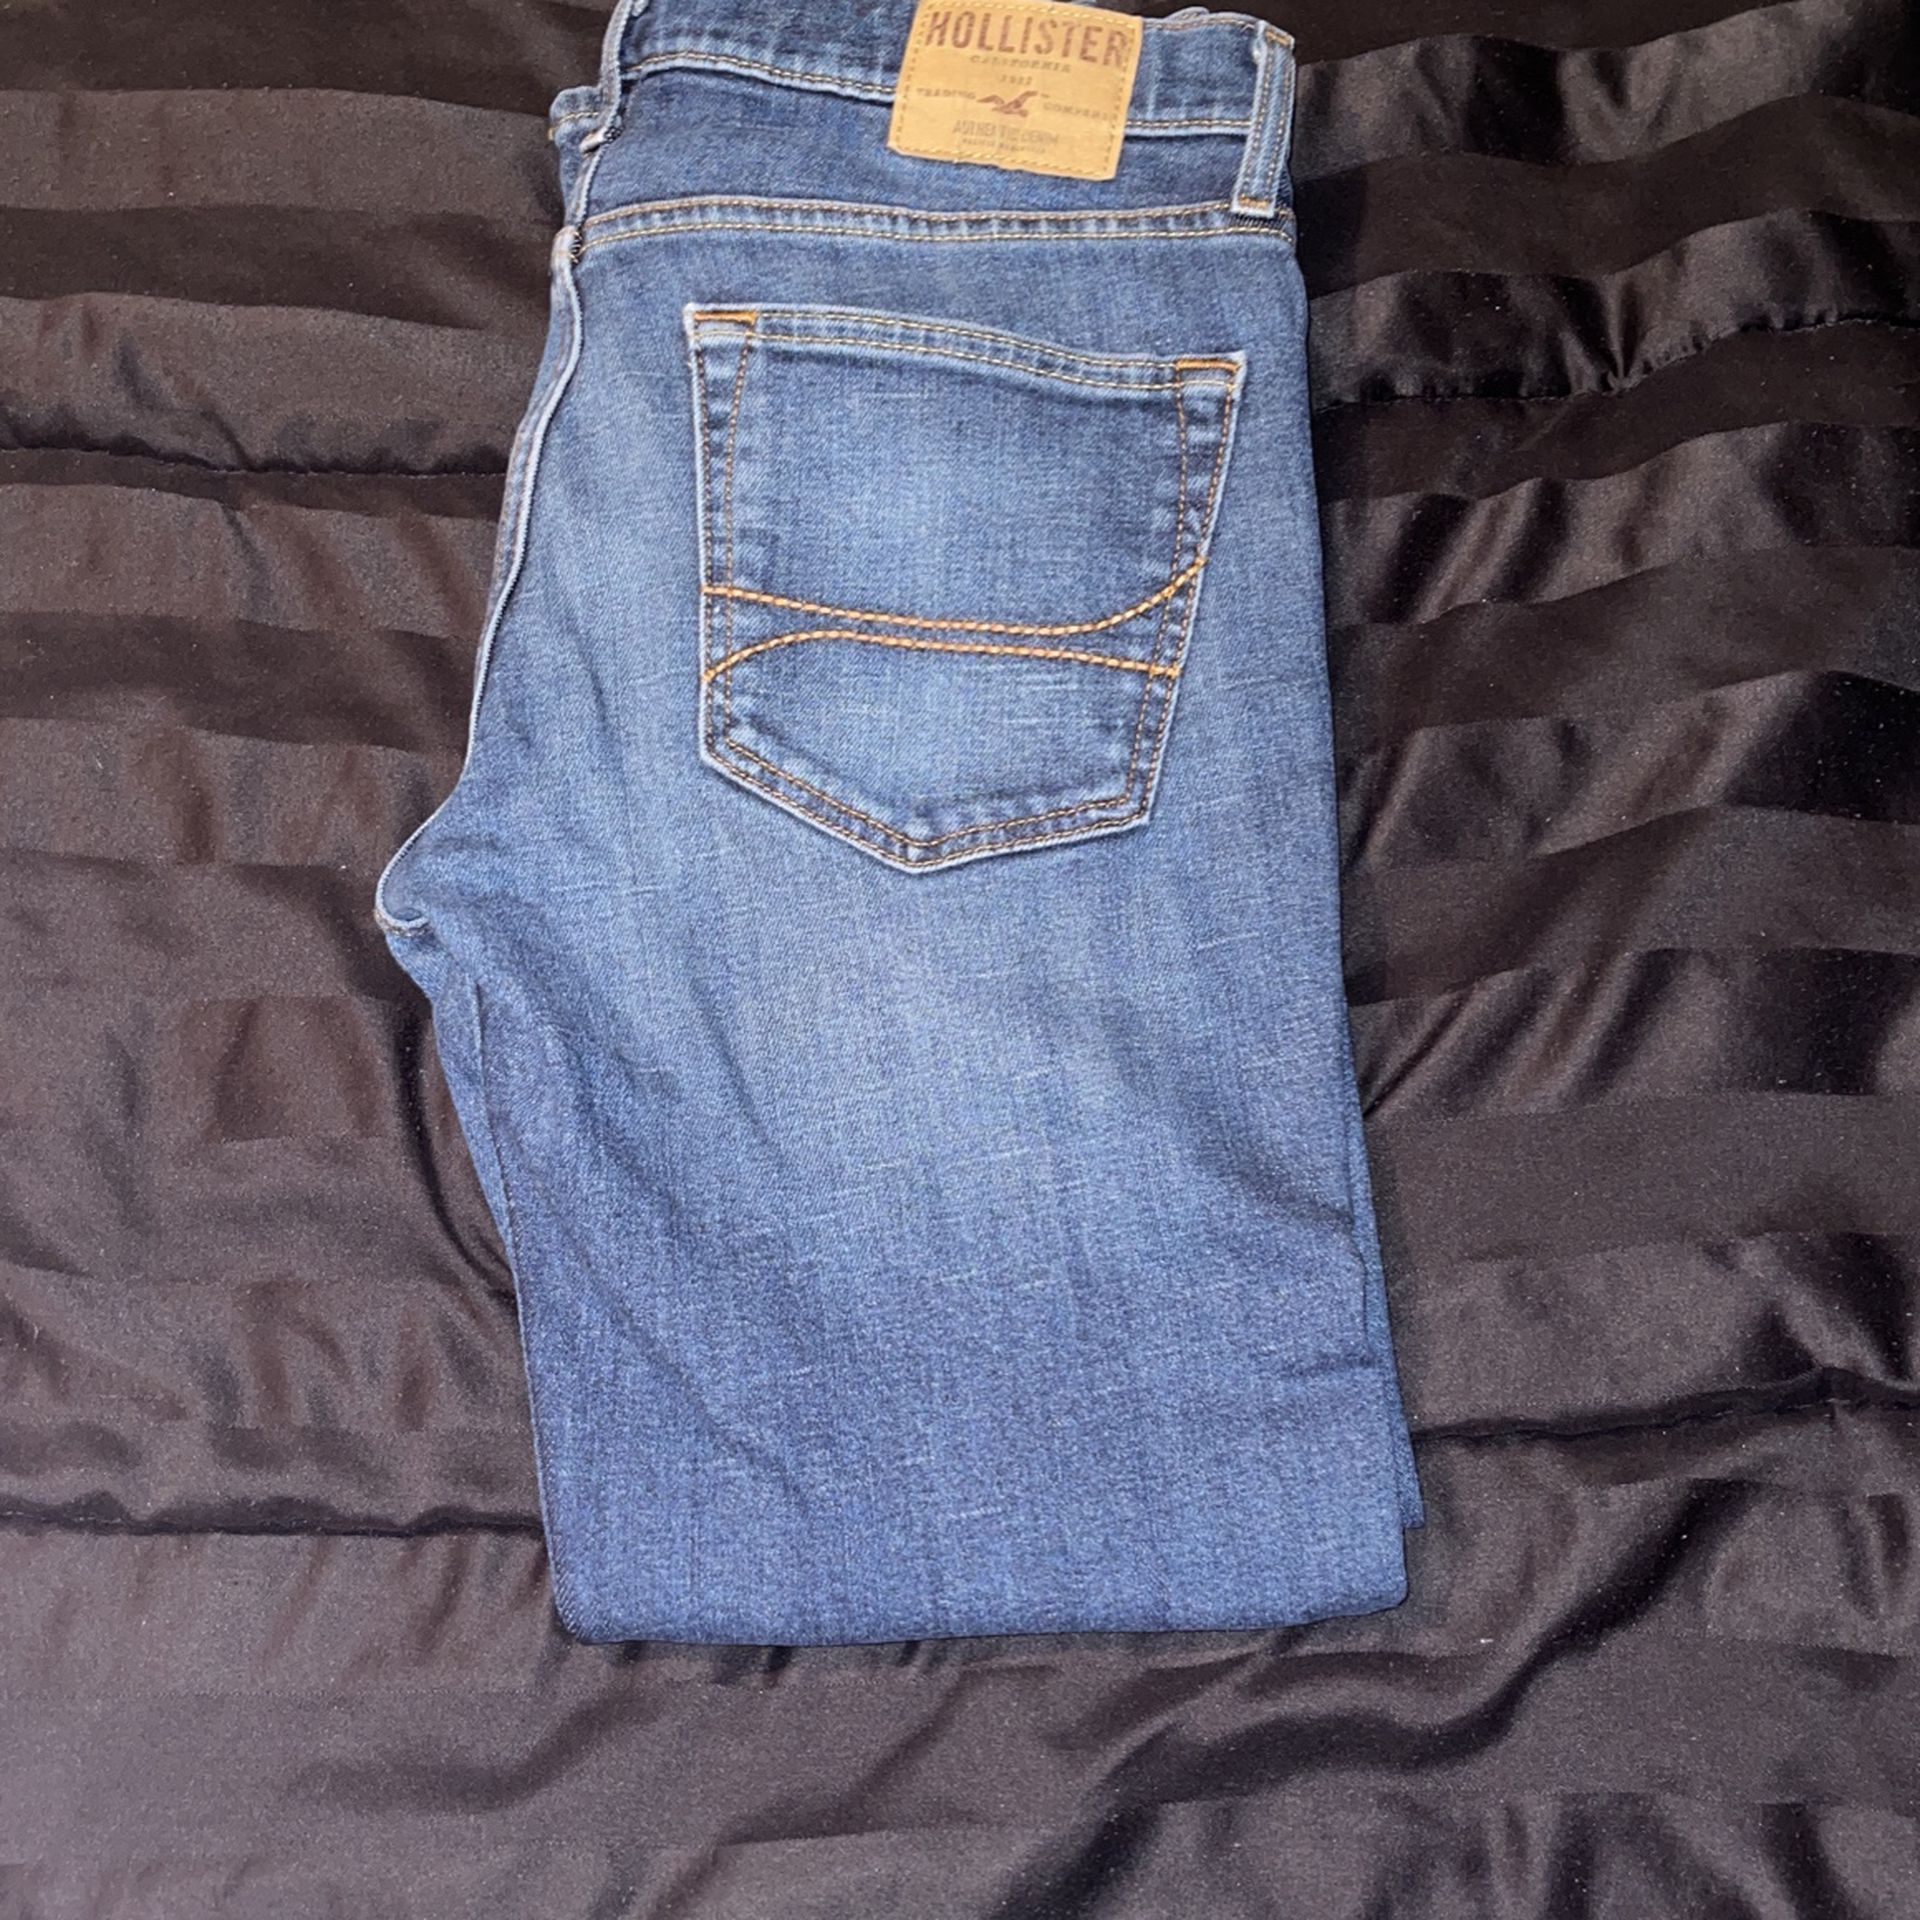 Hollister Mens Jeans Size (32x30) for Sale in Laredo, TX